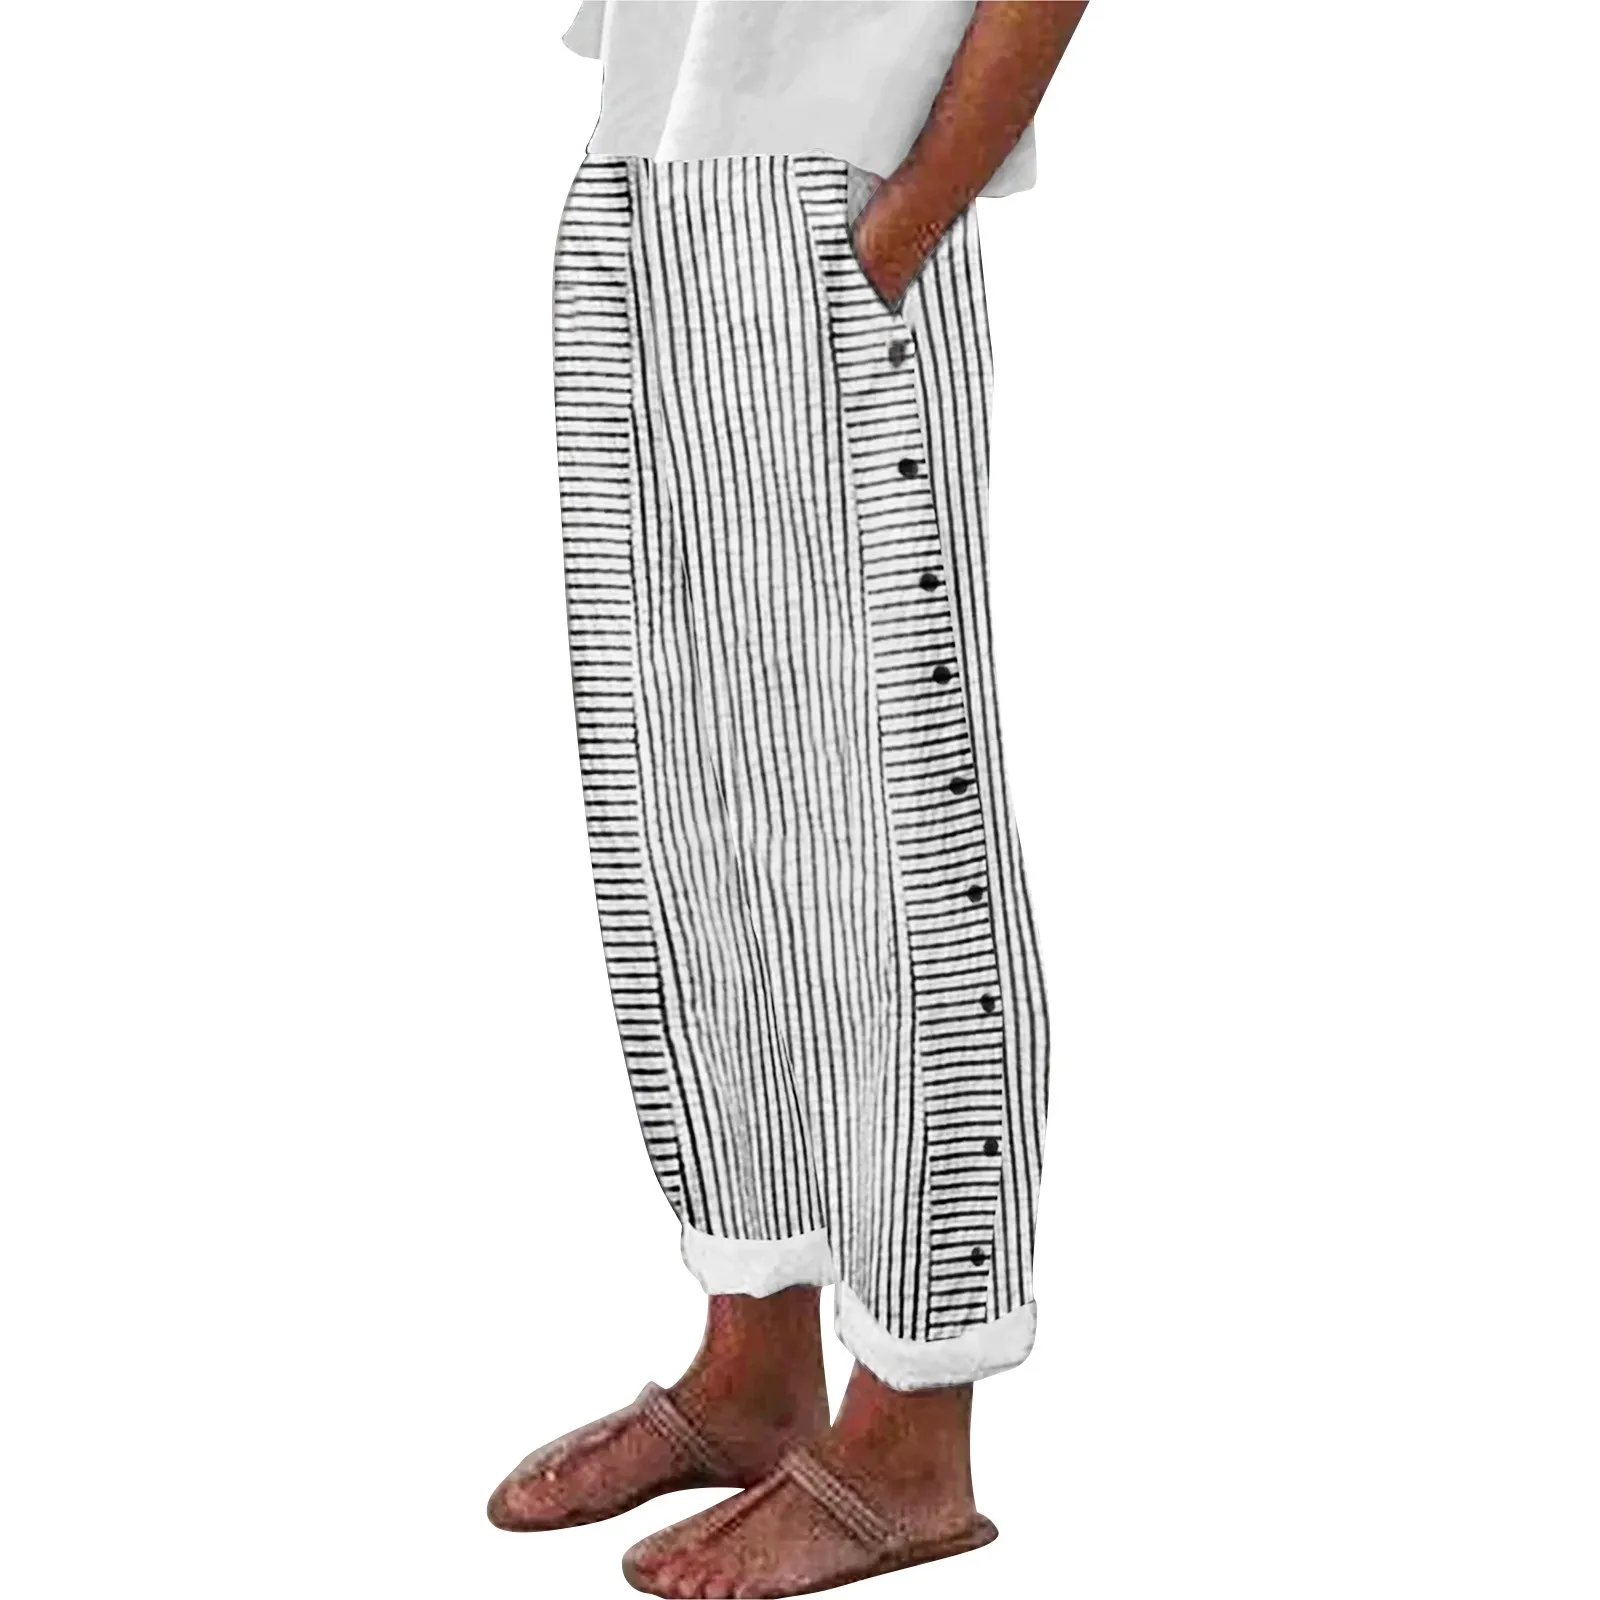 

Women's Cotton And Linen Striped trousers, Elastic High Waistband Pocket Pants, Side Buttons Nine Point Loose Casual Pants